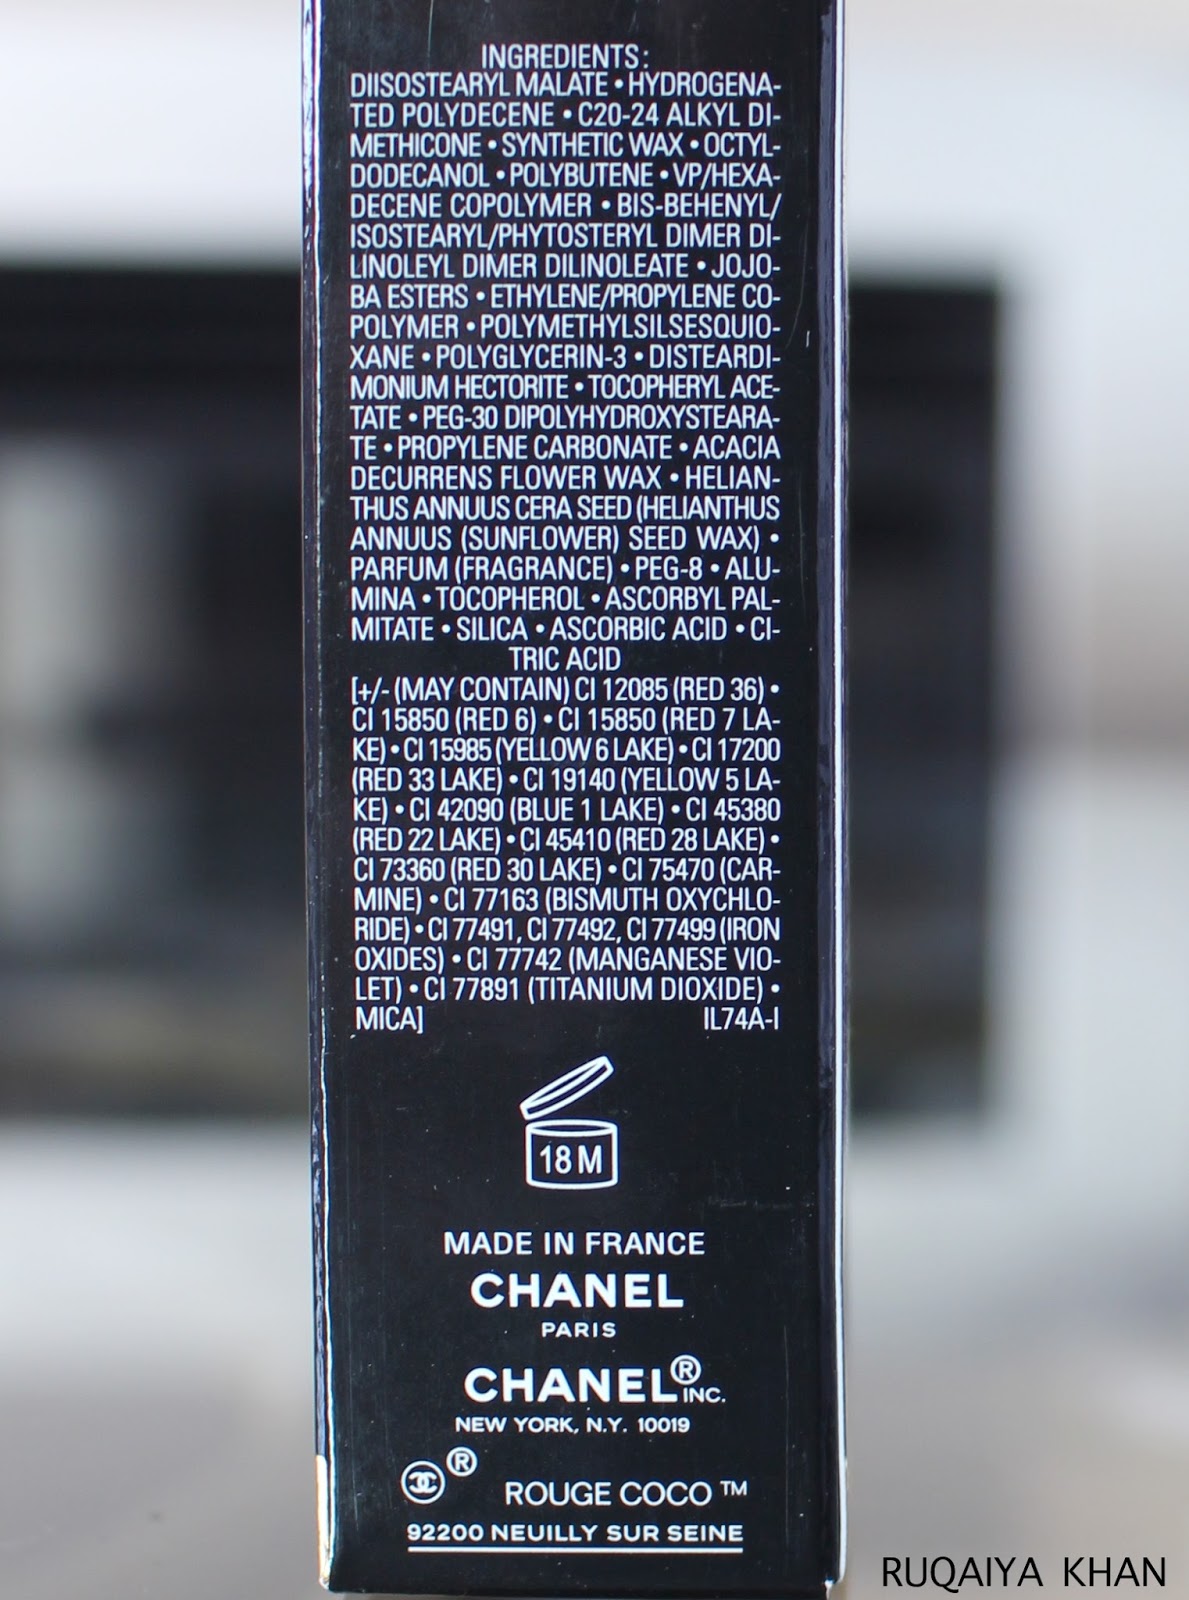 Ruqaiya Khan: CHANEL ROUGE COCO Ultra Hydrating Lip Colour in 434  MADEMOISELLE Review and Swatch